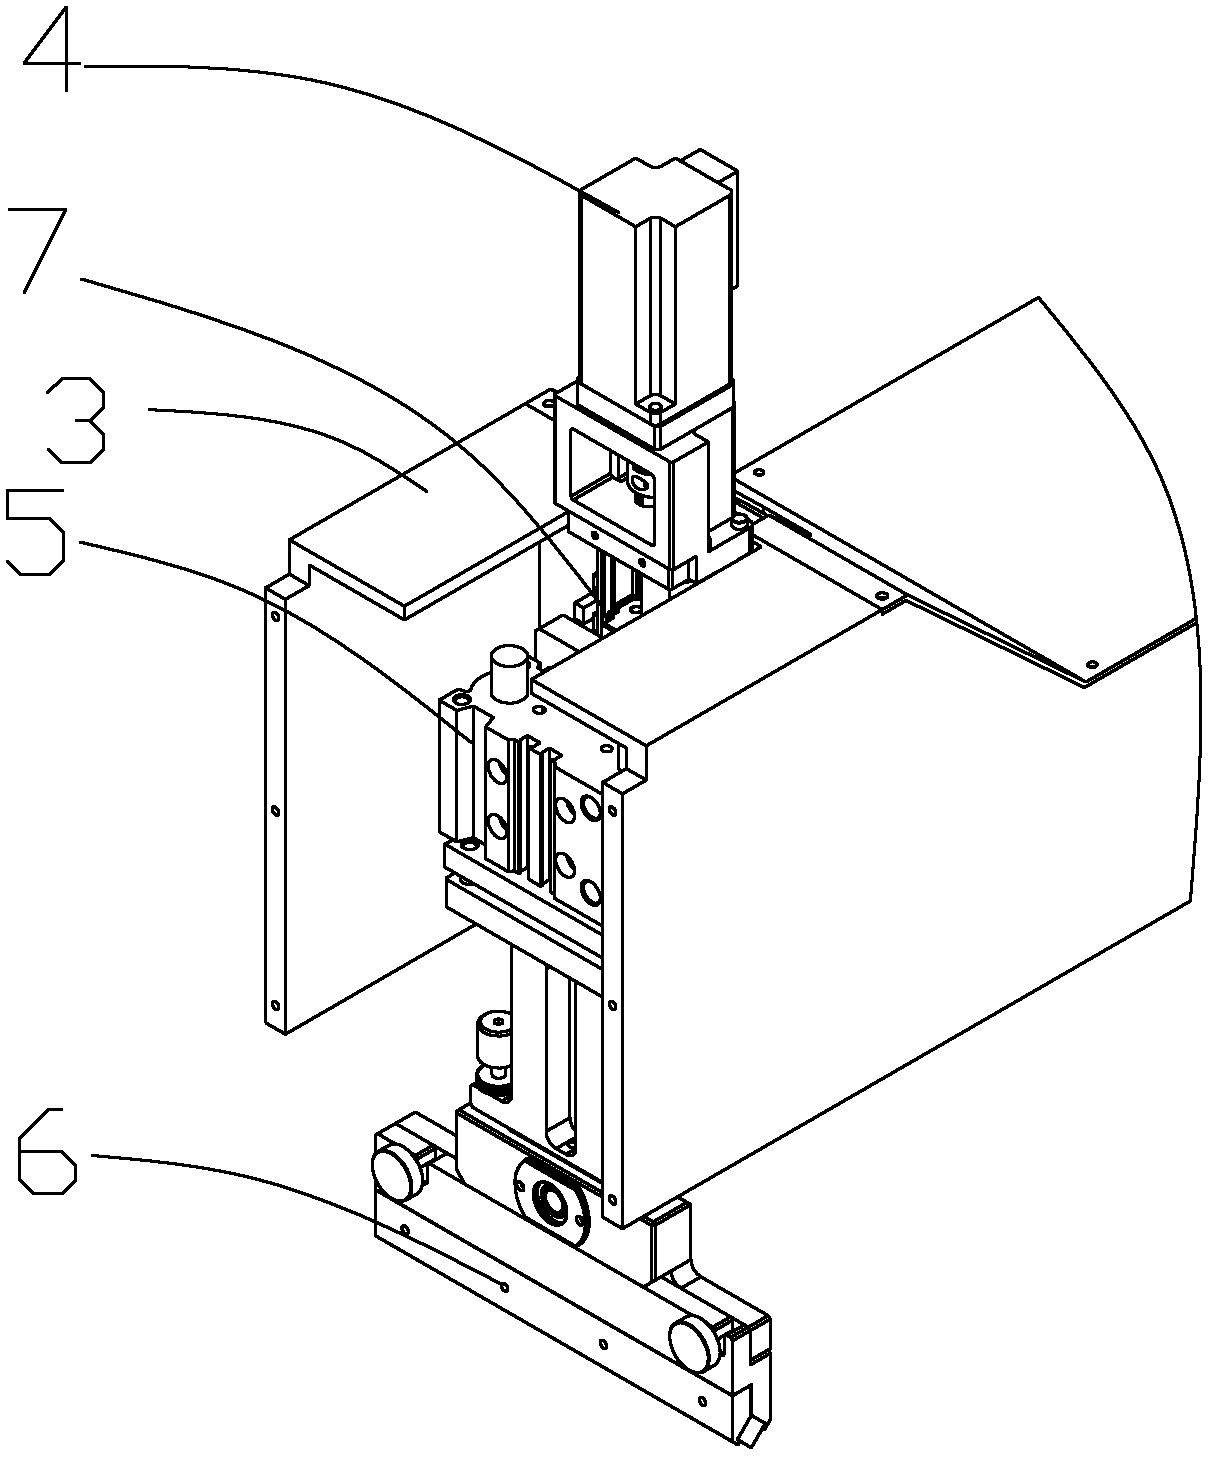 Double-mode printing device for solar cells